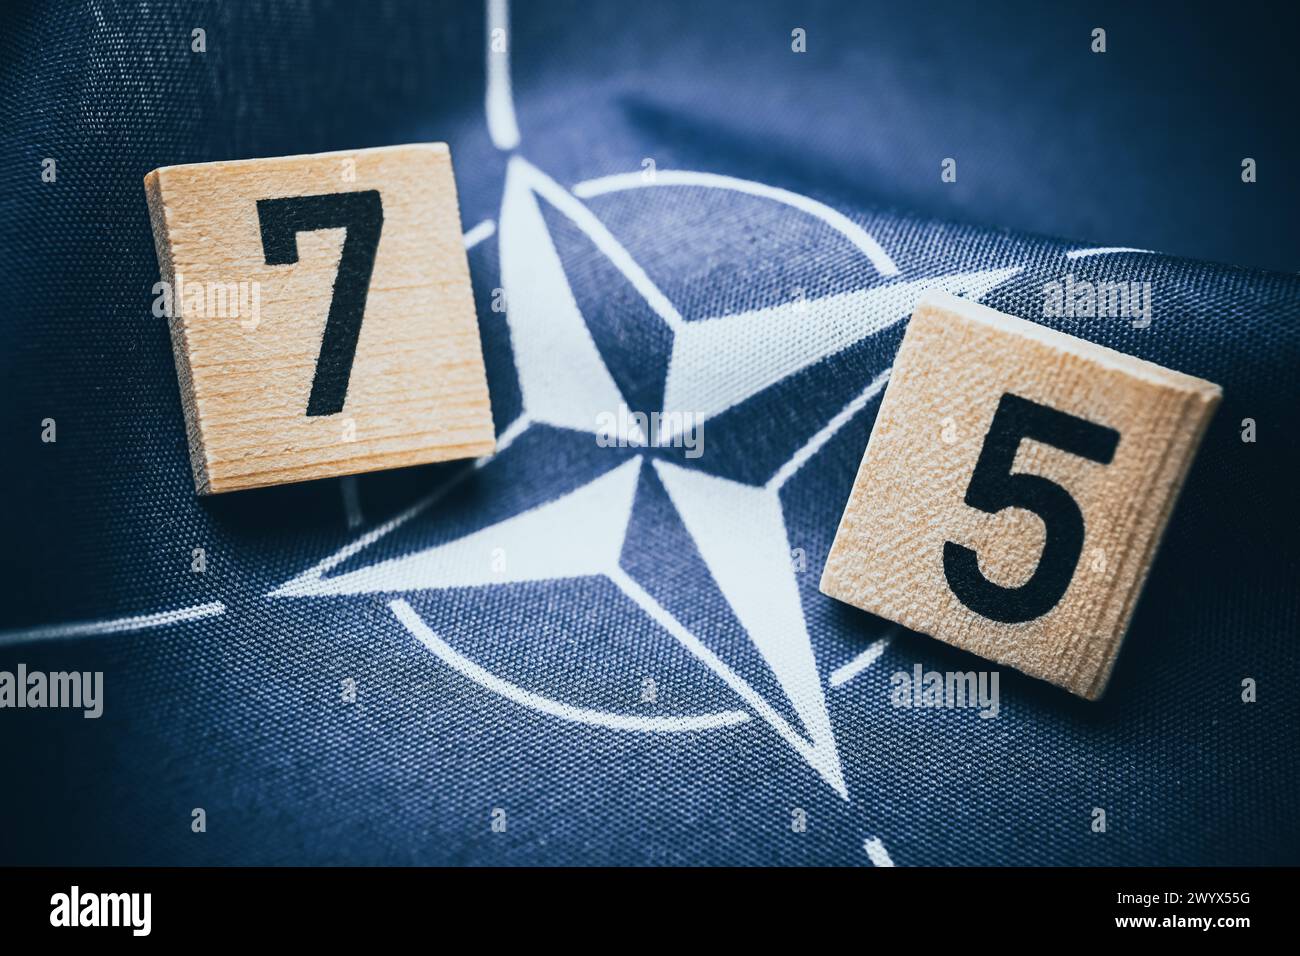 NATO Flag With The Number 75, Symbolic Photo Founding Of NATO 75 Years Ago Stock Photo